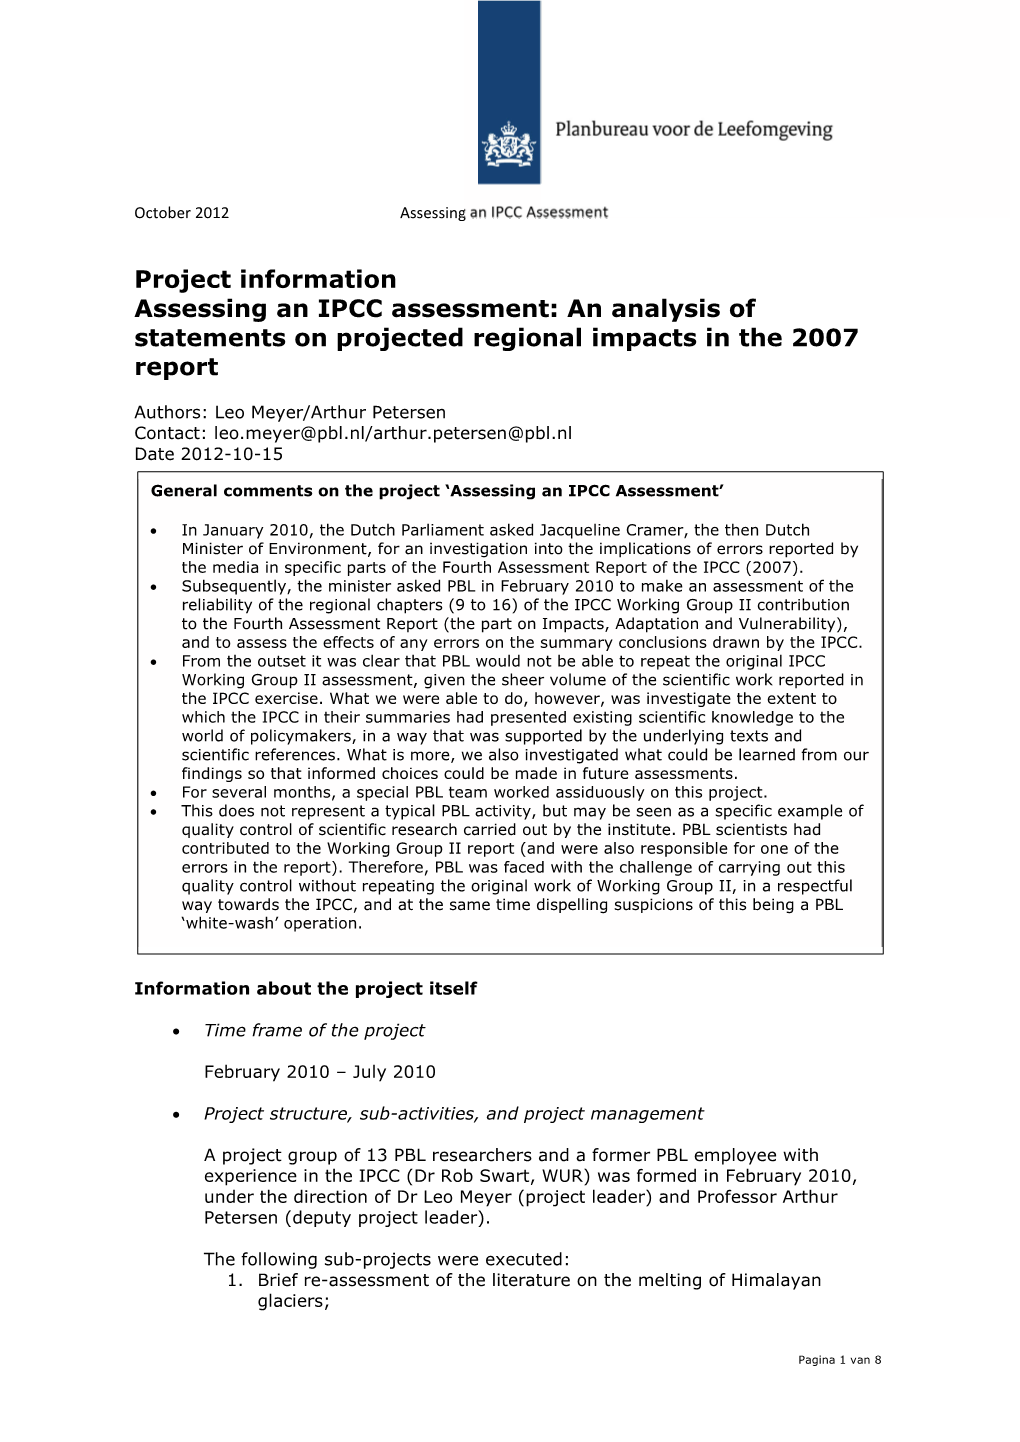 Project Information Assessing an IPCC Assessment: an Analysis of Statements on Projected Regional Impacts in the 2007 Report